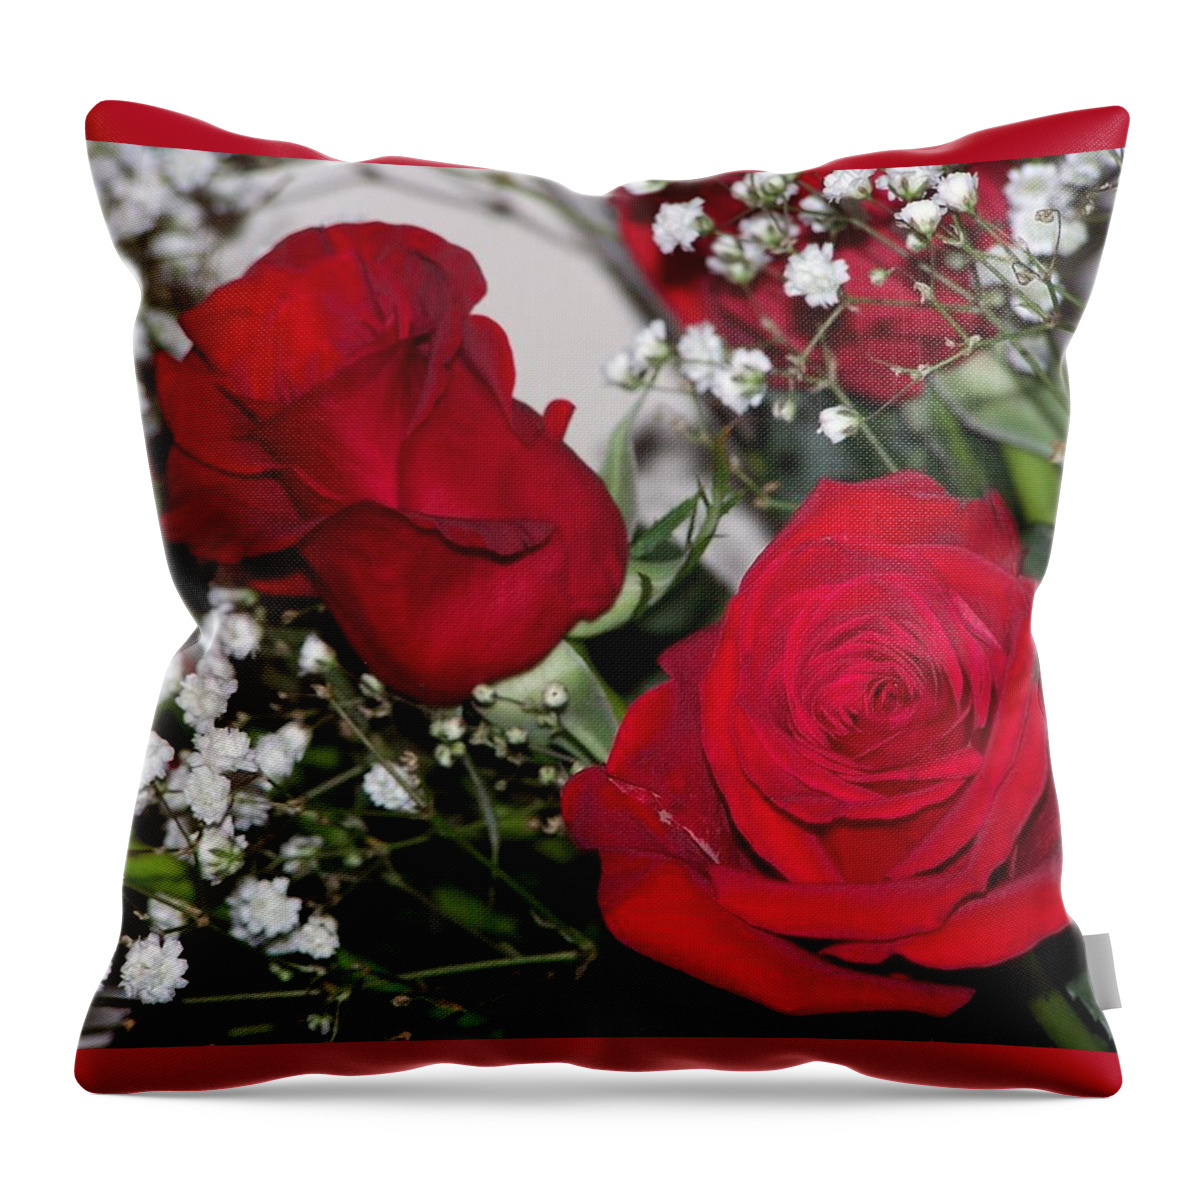 Rose Throw Pillow featuring the photograph Roses by Susan Turner Soulis